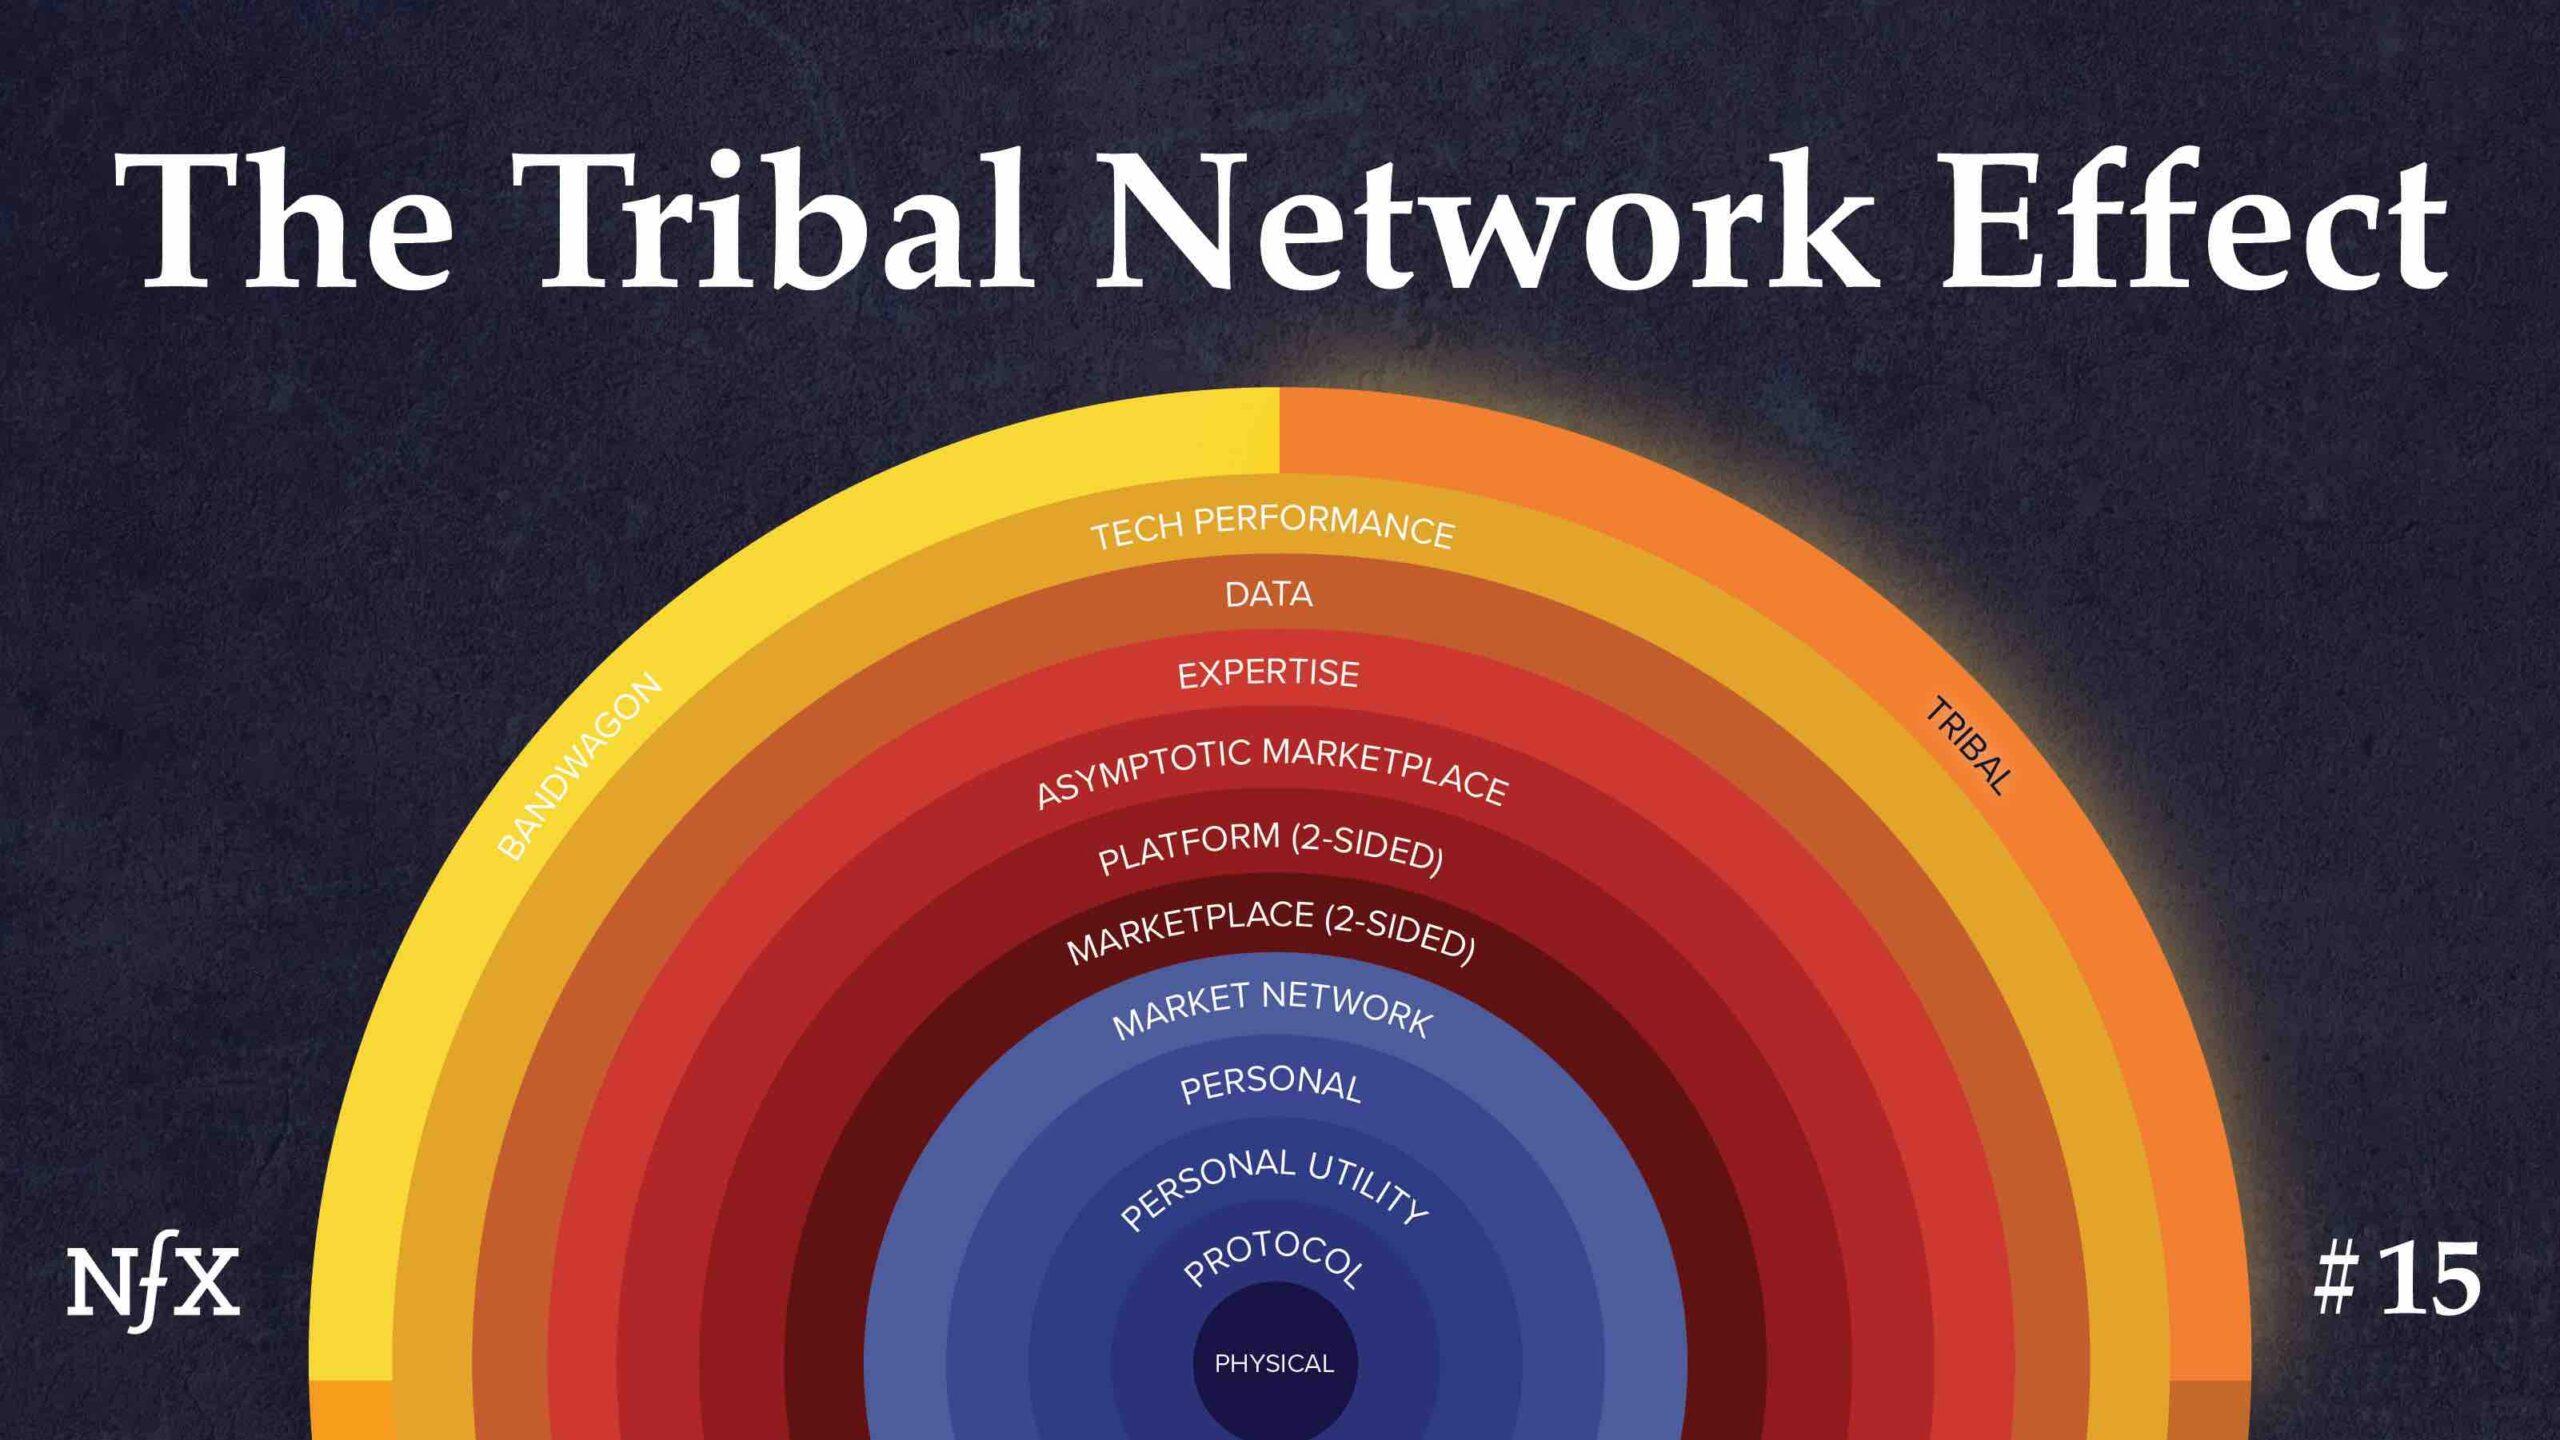 Tribal Network Effects